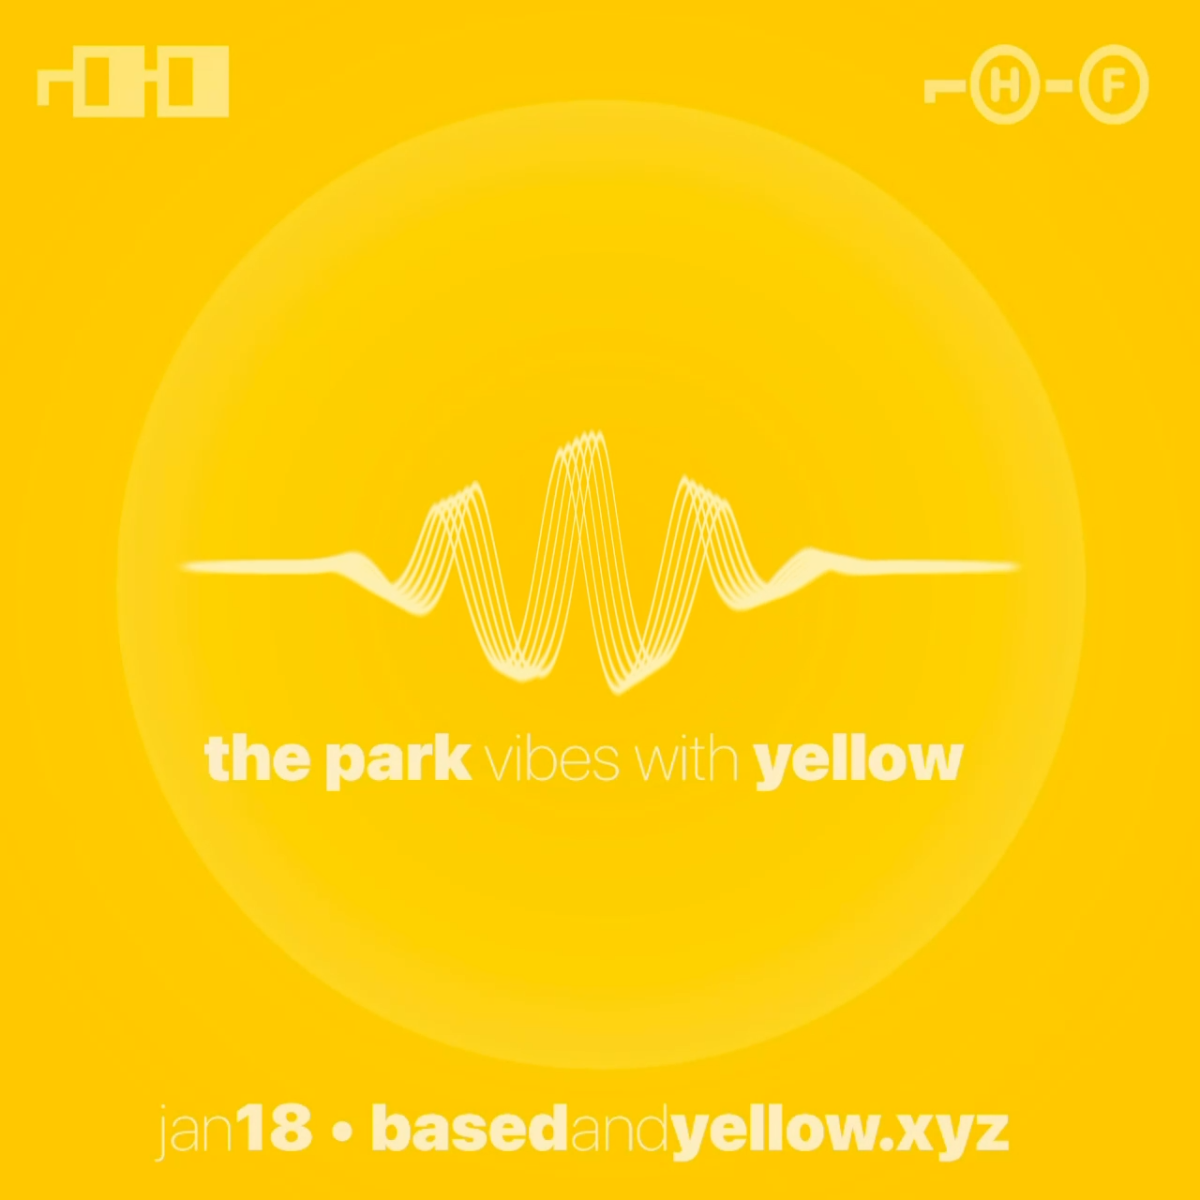 The Park Vibes with Yellow ⌐Ⓗ-Ⓕ 🟡 🎶